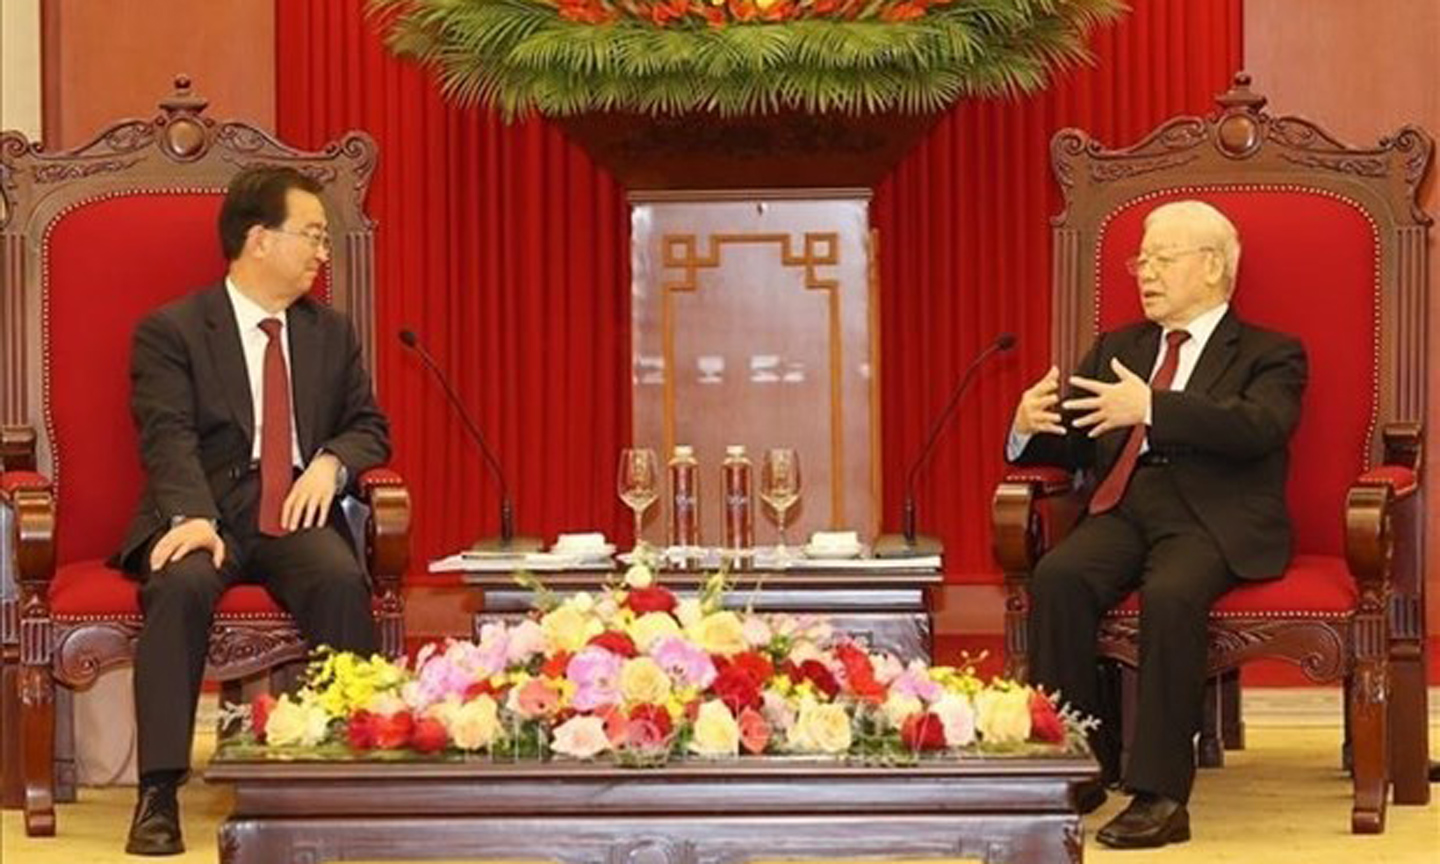 CCooperation between border localities contributes to Vietnam-China ties: Party chief